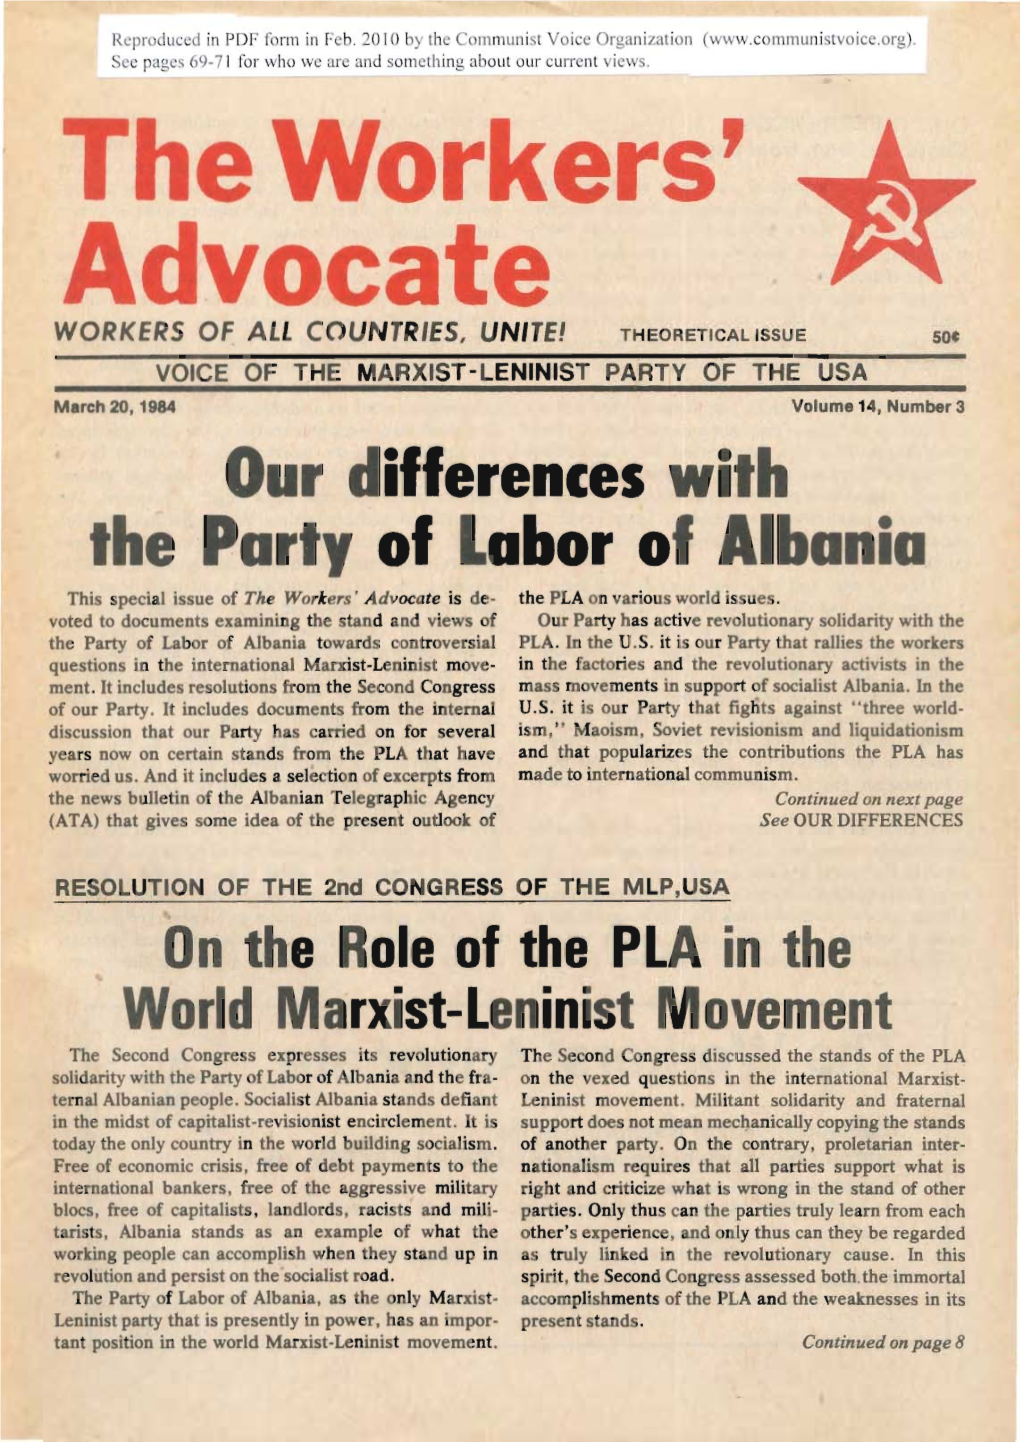 The Workers' Advocate WORKERS OF